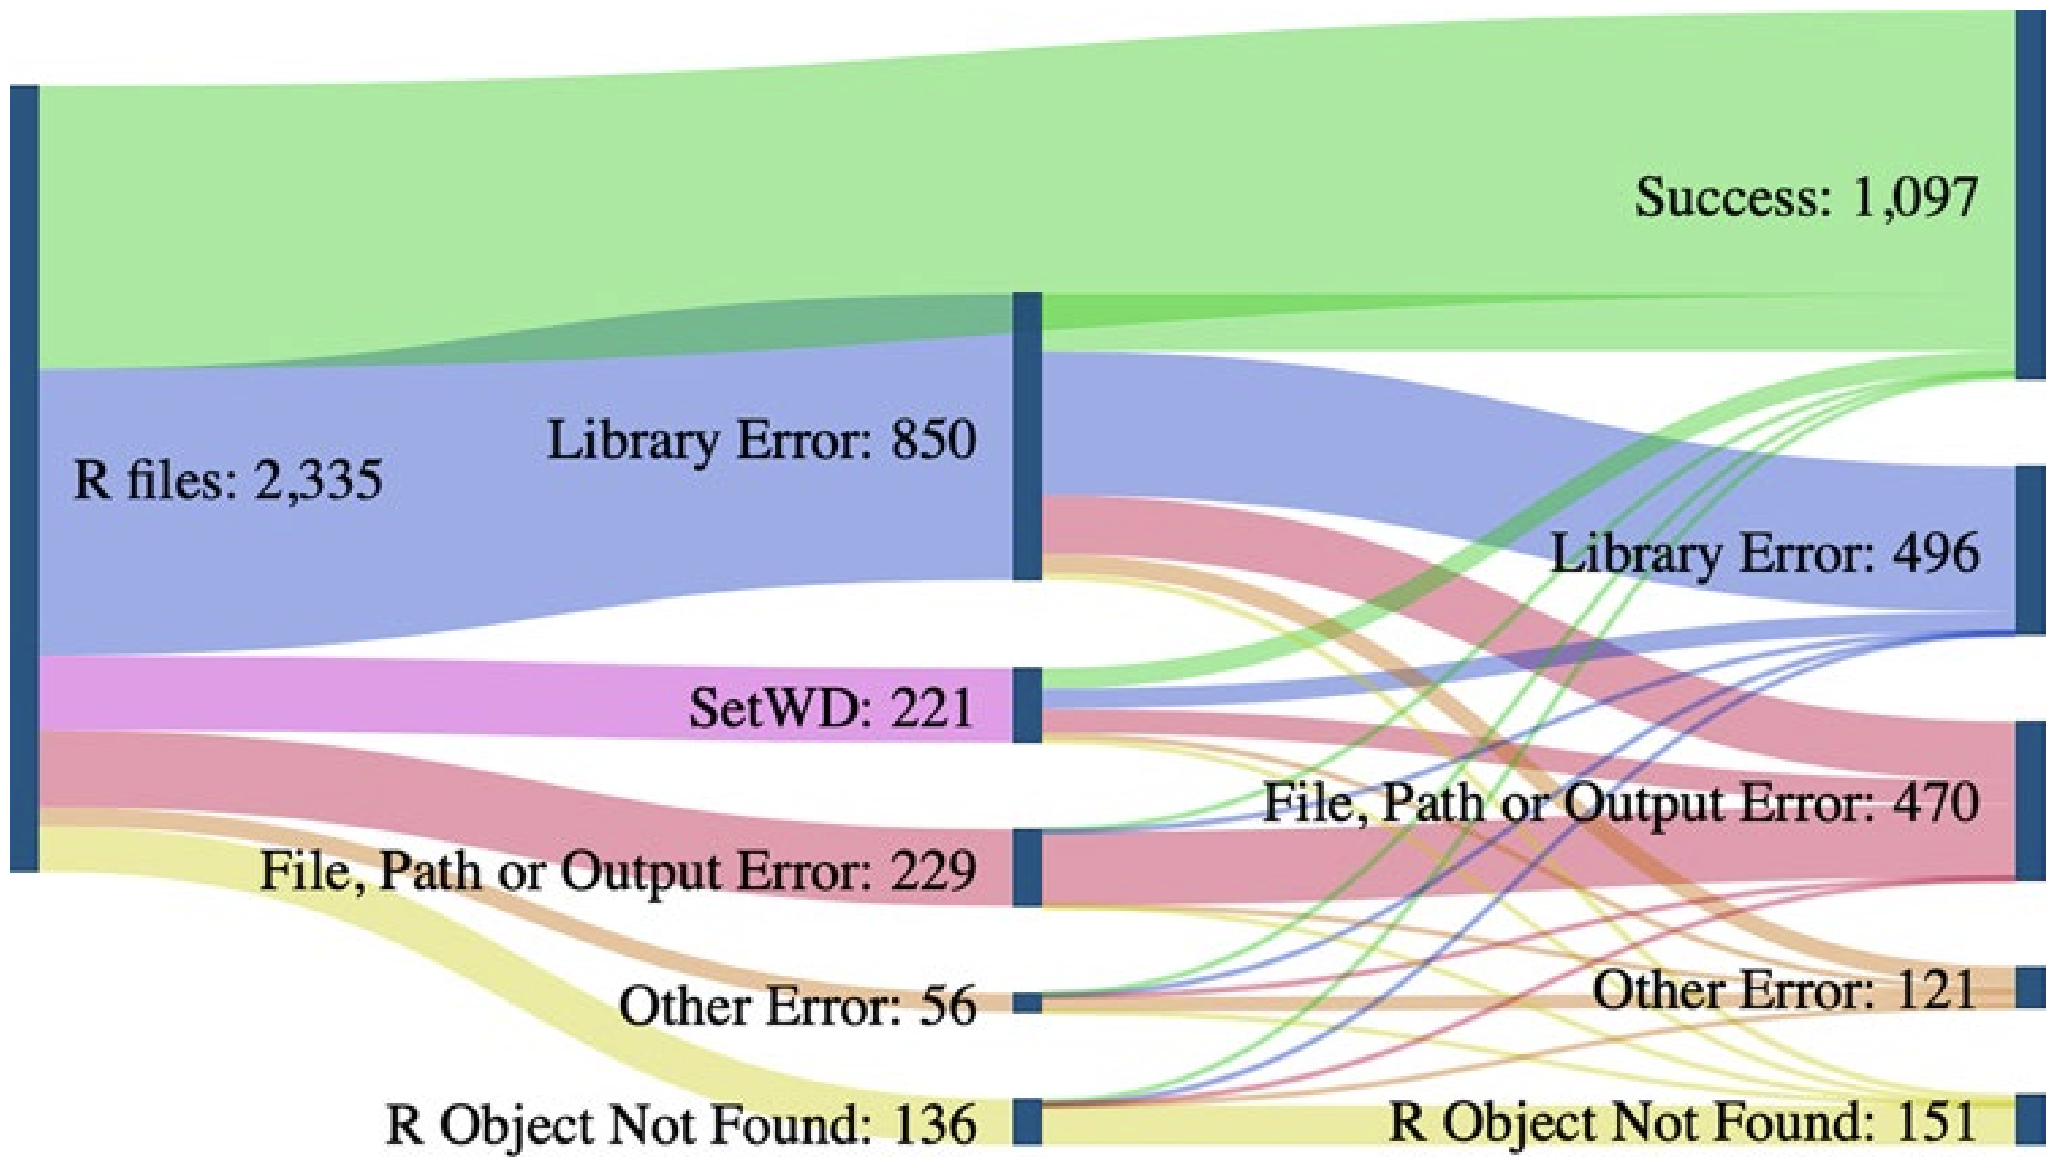 Figure showing that of 2335 R files only 1097 succeed while 850 experienced a library error, 221 involve a set working directory error, 229 had a file path error, 136 had an 'object not found' error, and 56 had some other type of error